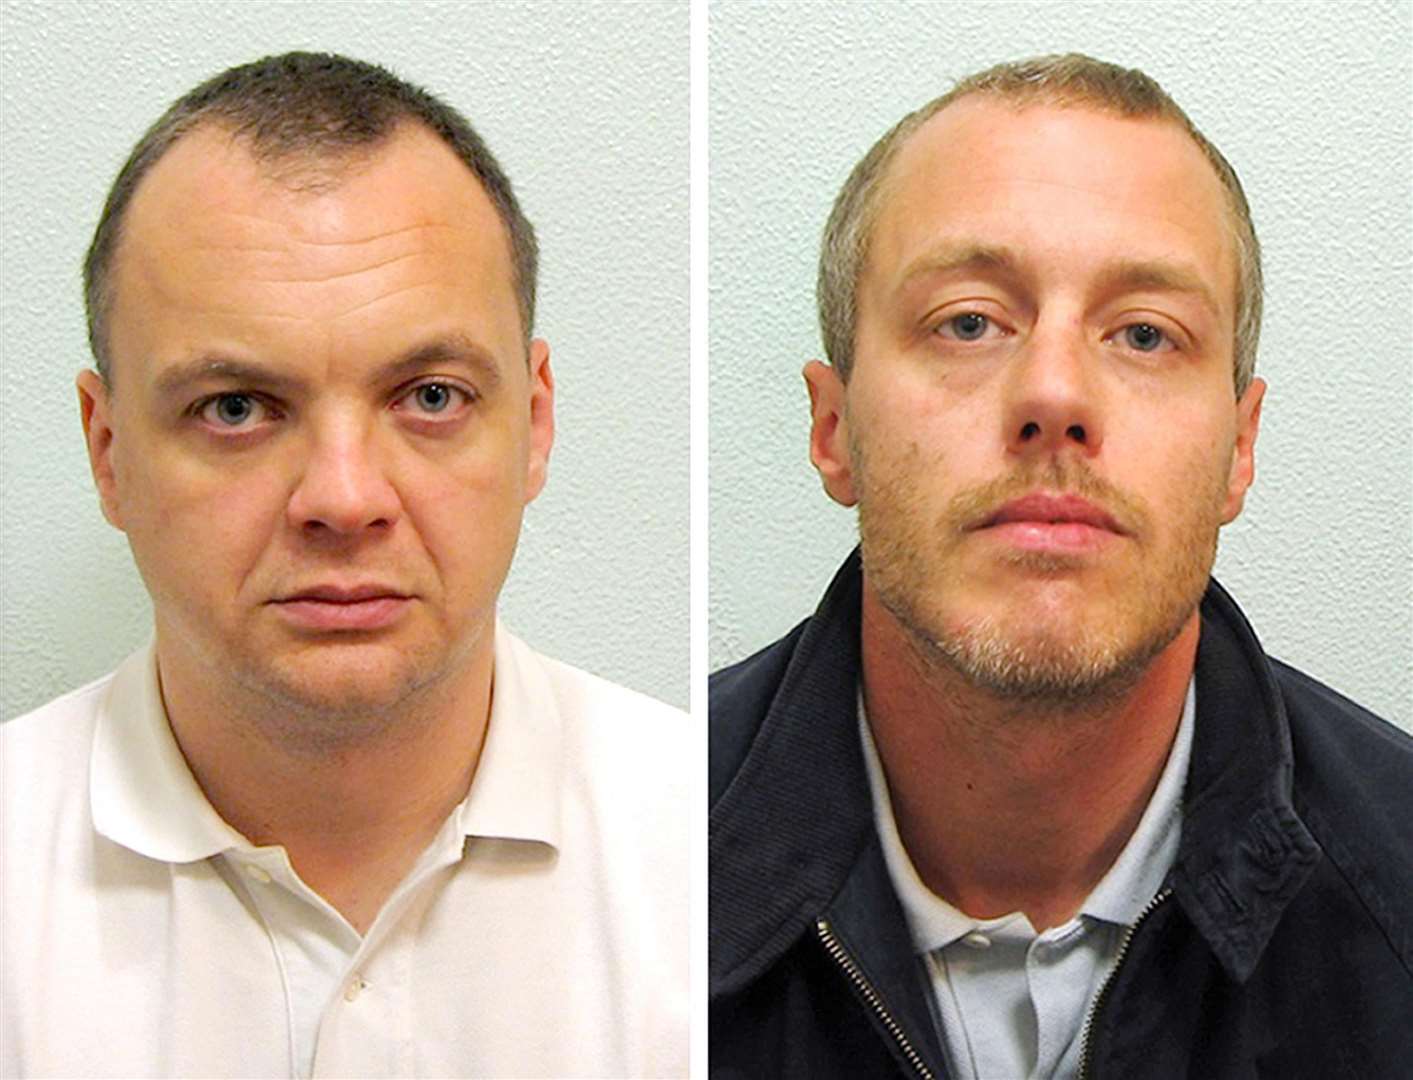 Gary Dobson and David Norris were jailed for life in 2012 (CPS/PA)